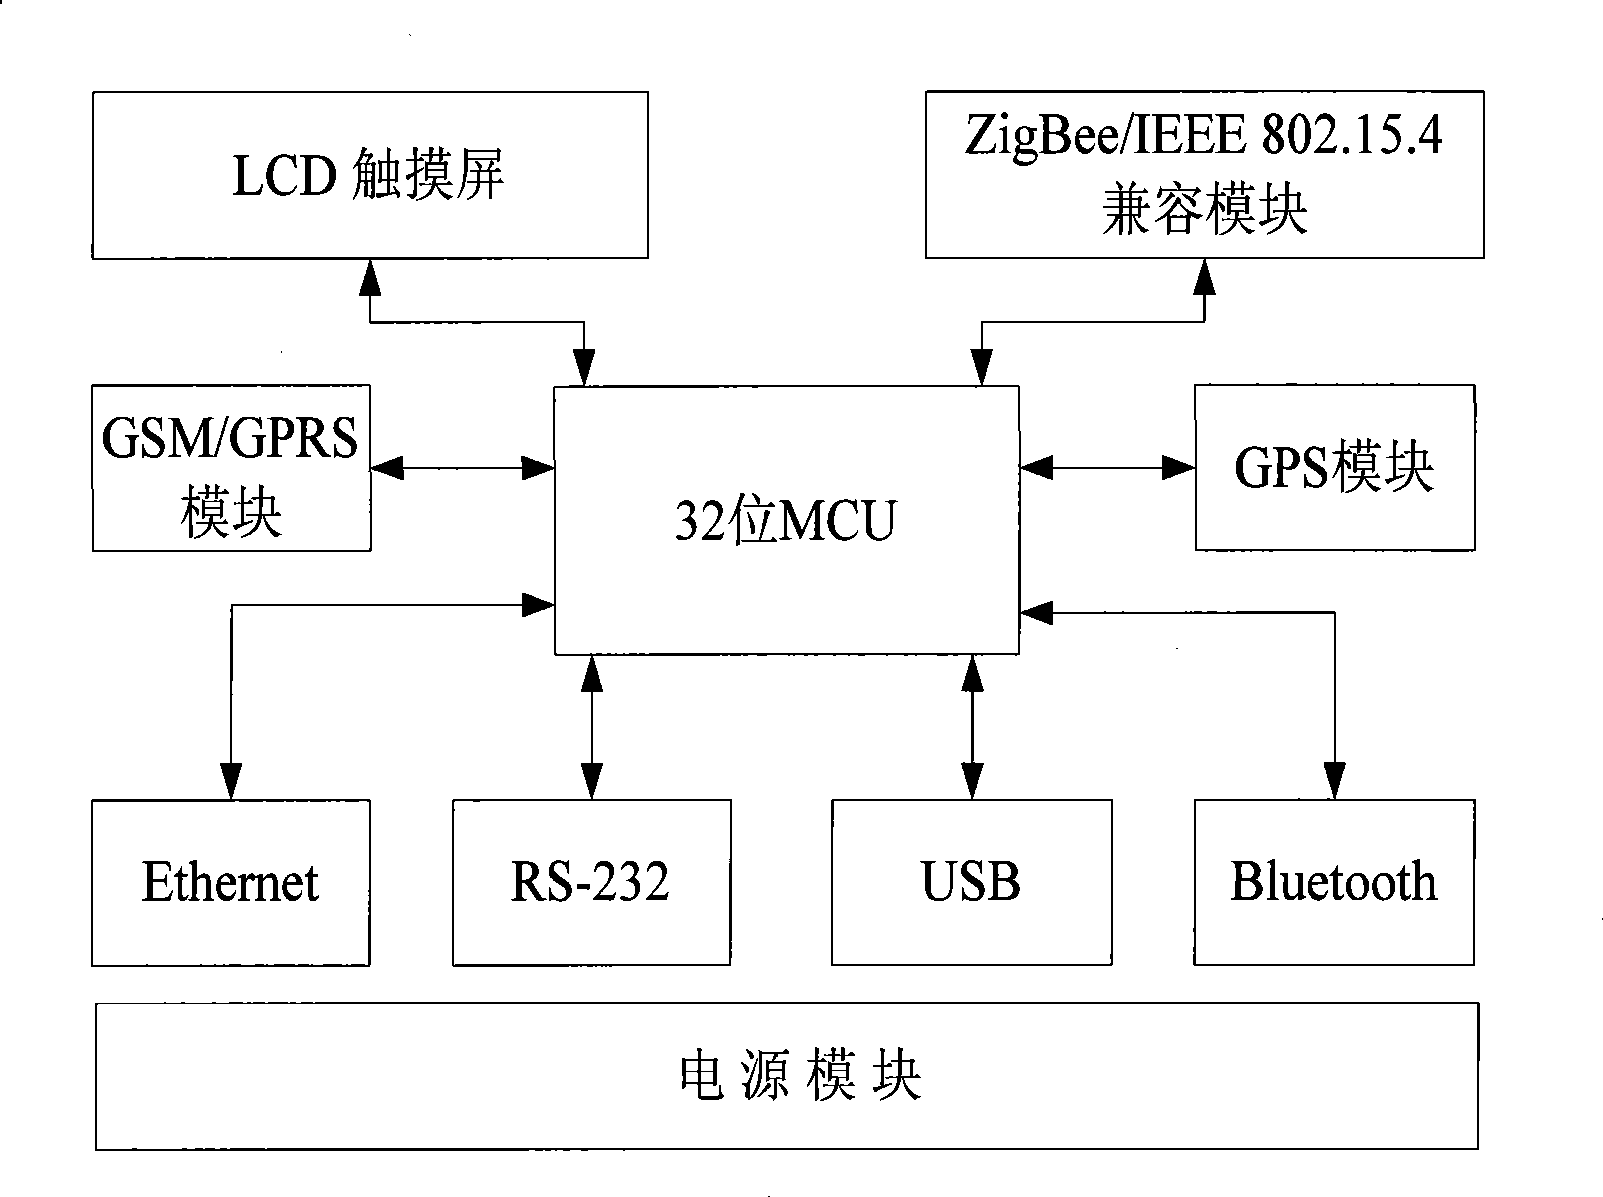 Nuclear monitoring system and method based on confounding sensor network